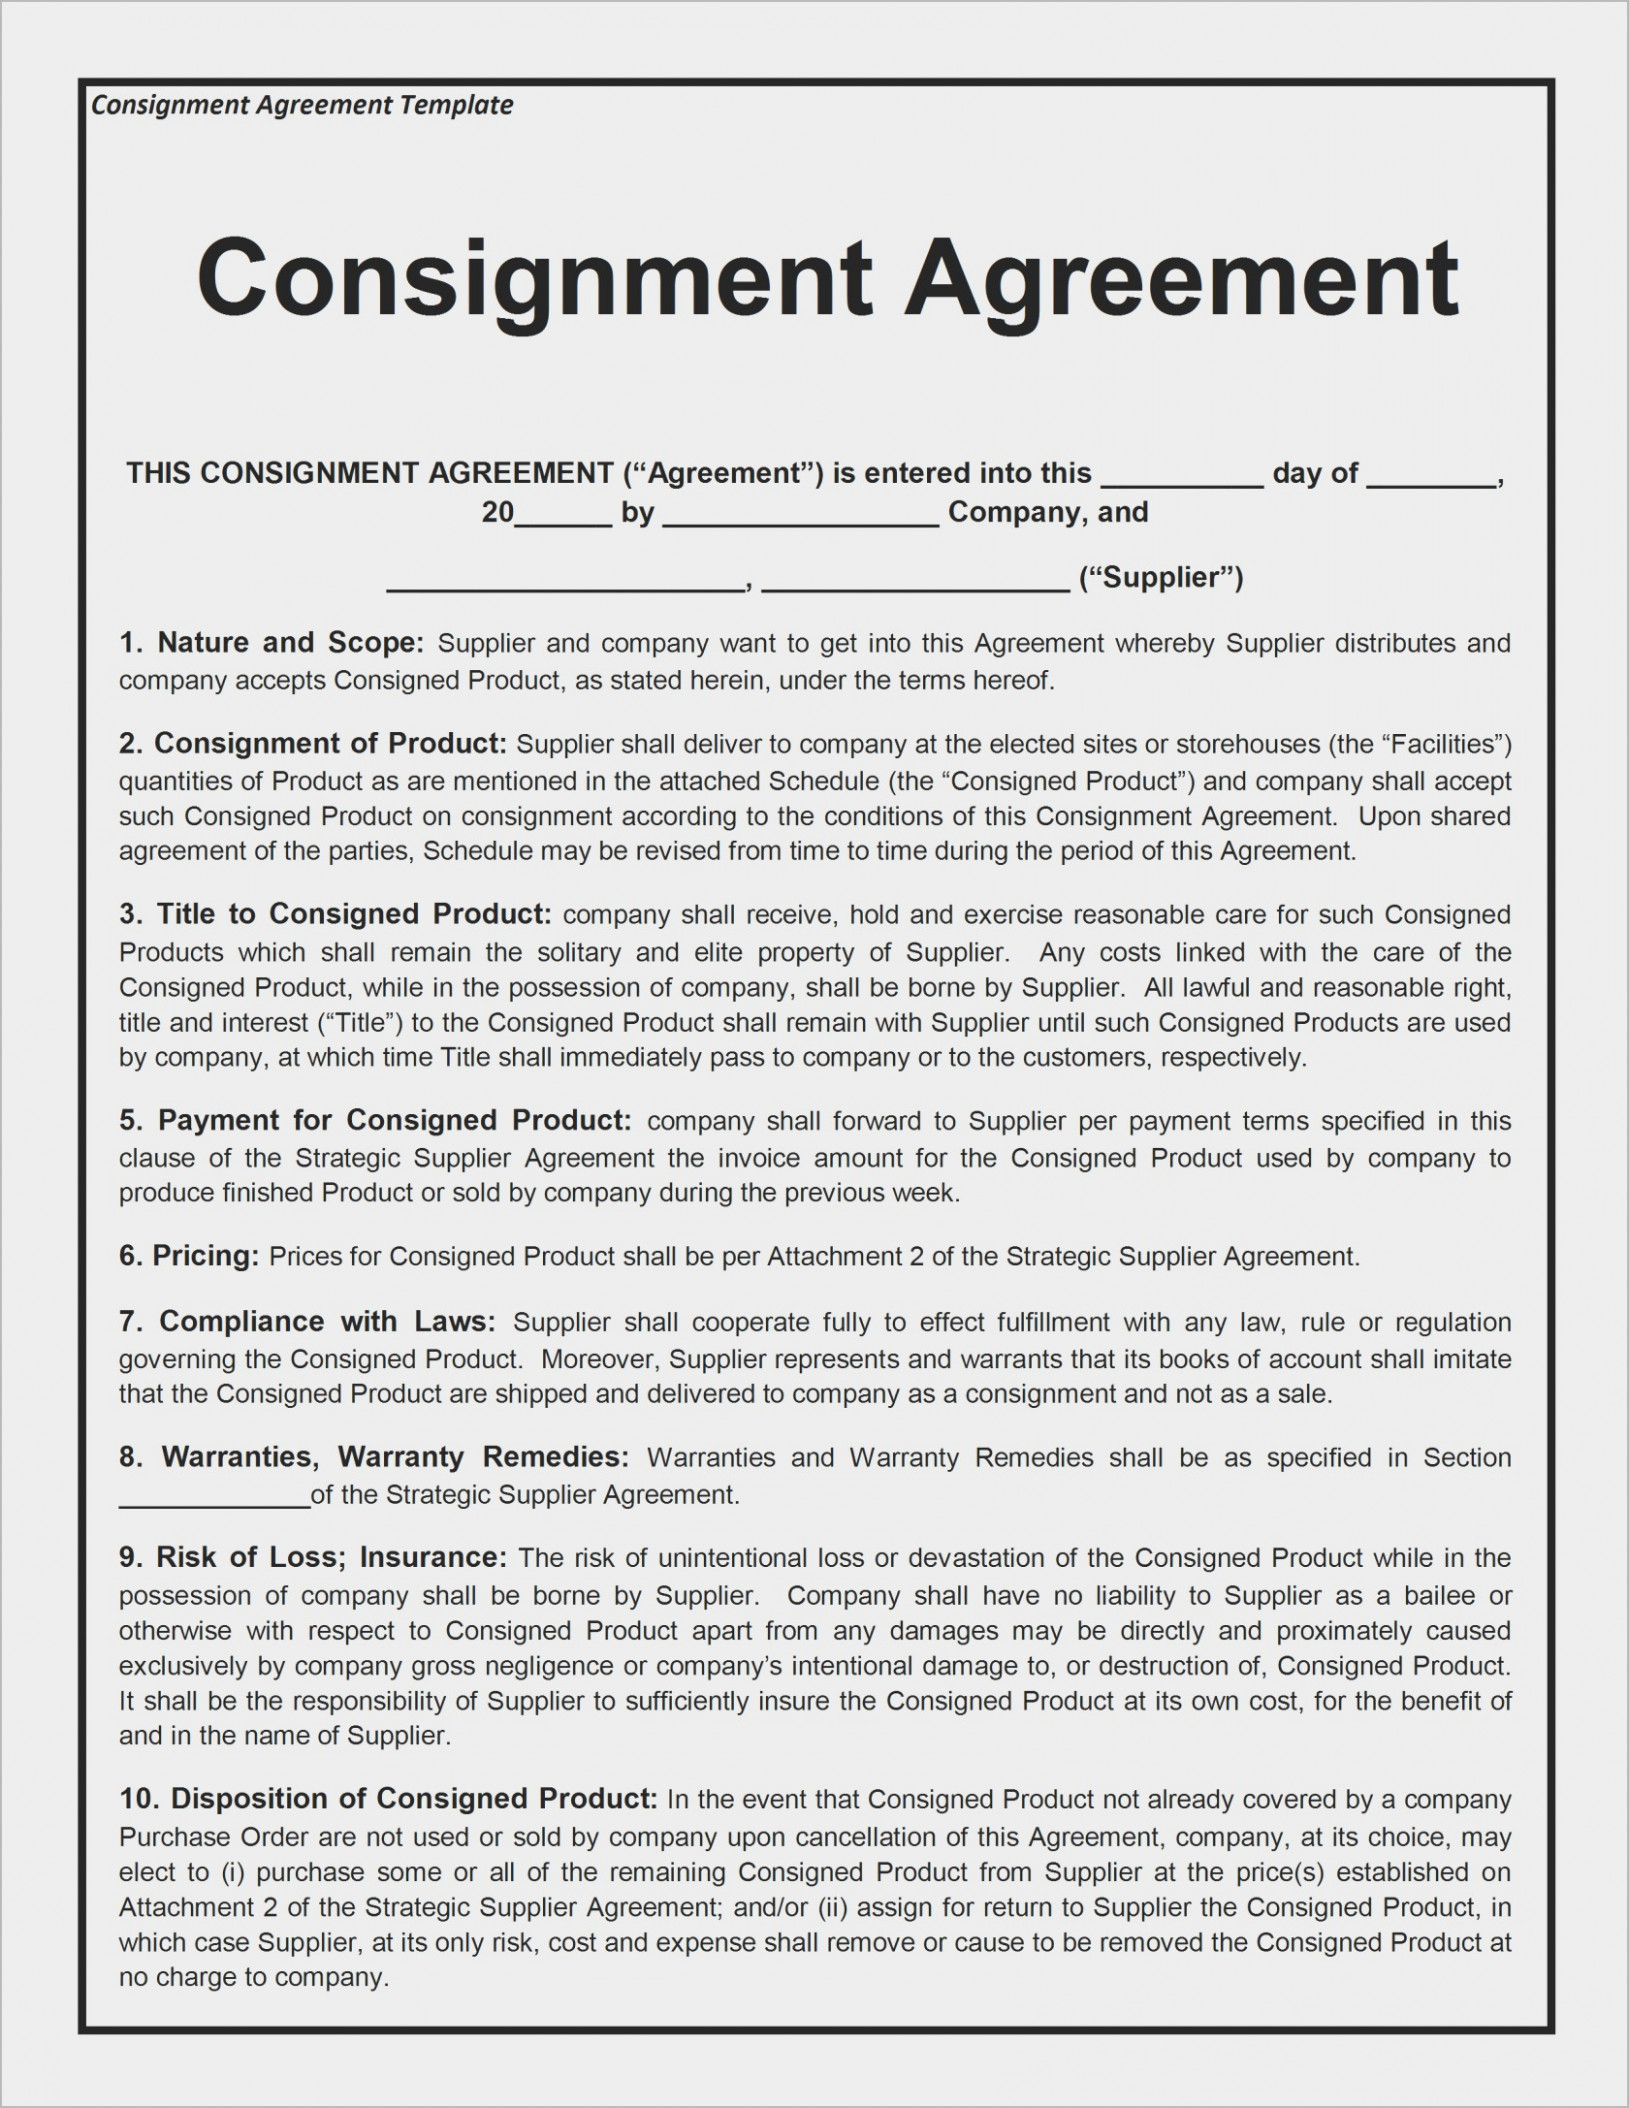 Gallery Consignment Agreement 15 Brilliant Ways To Realty Executives Mi Invoice And Resume